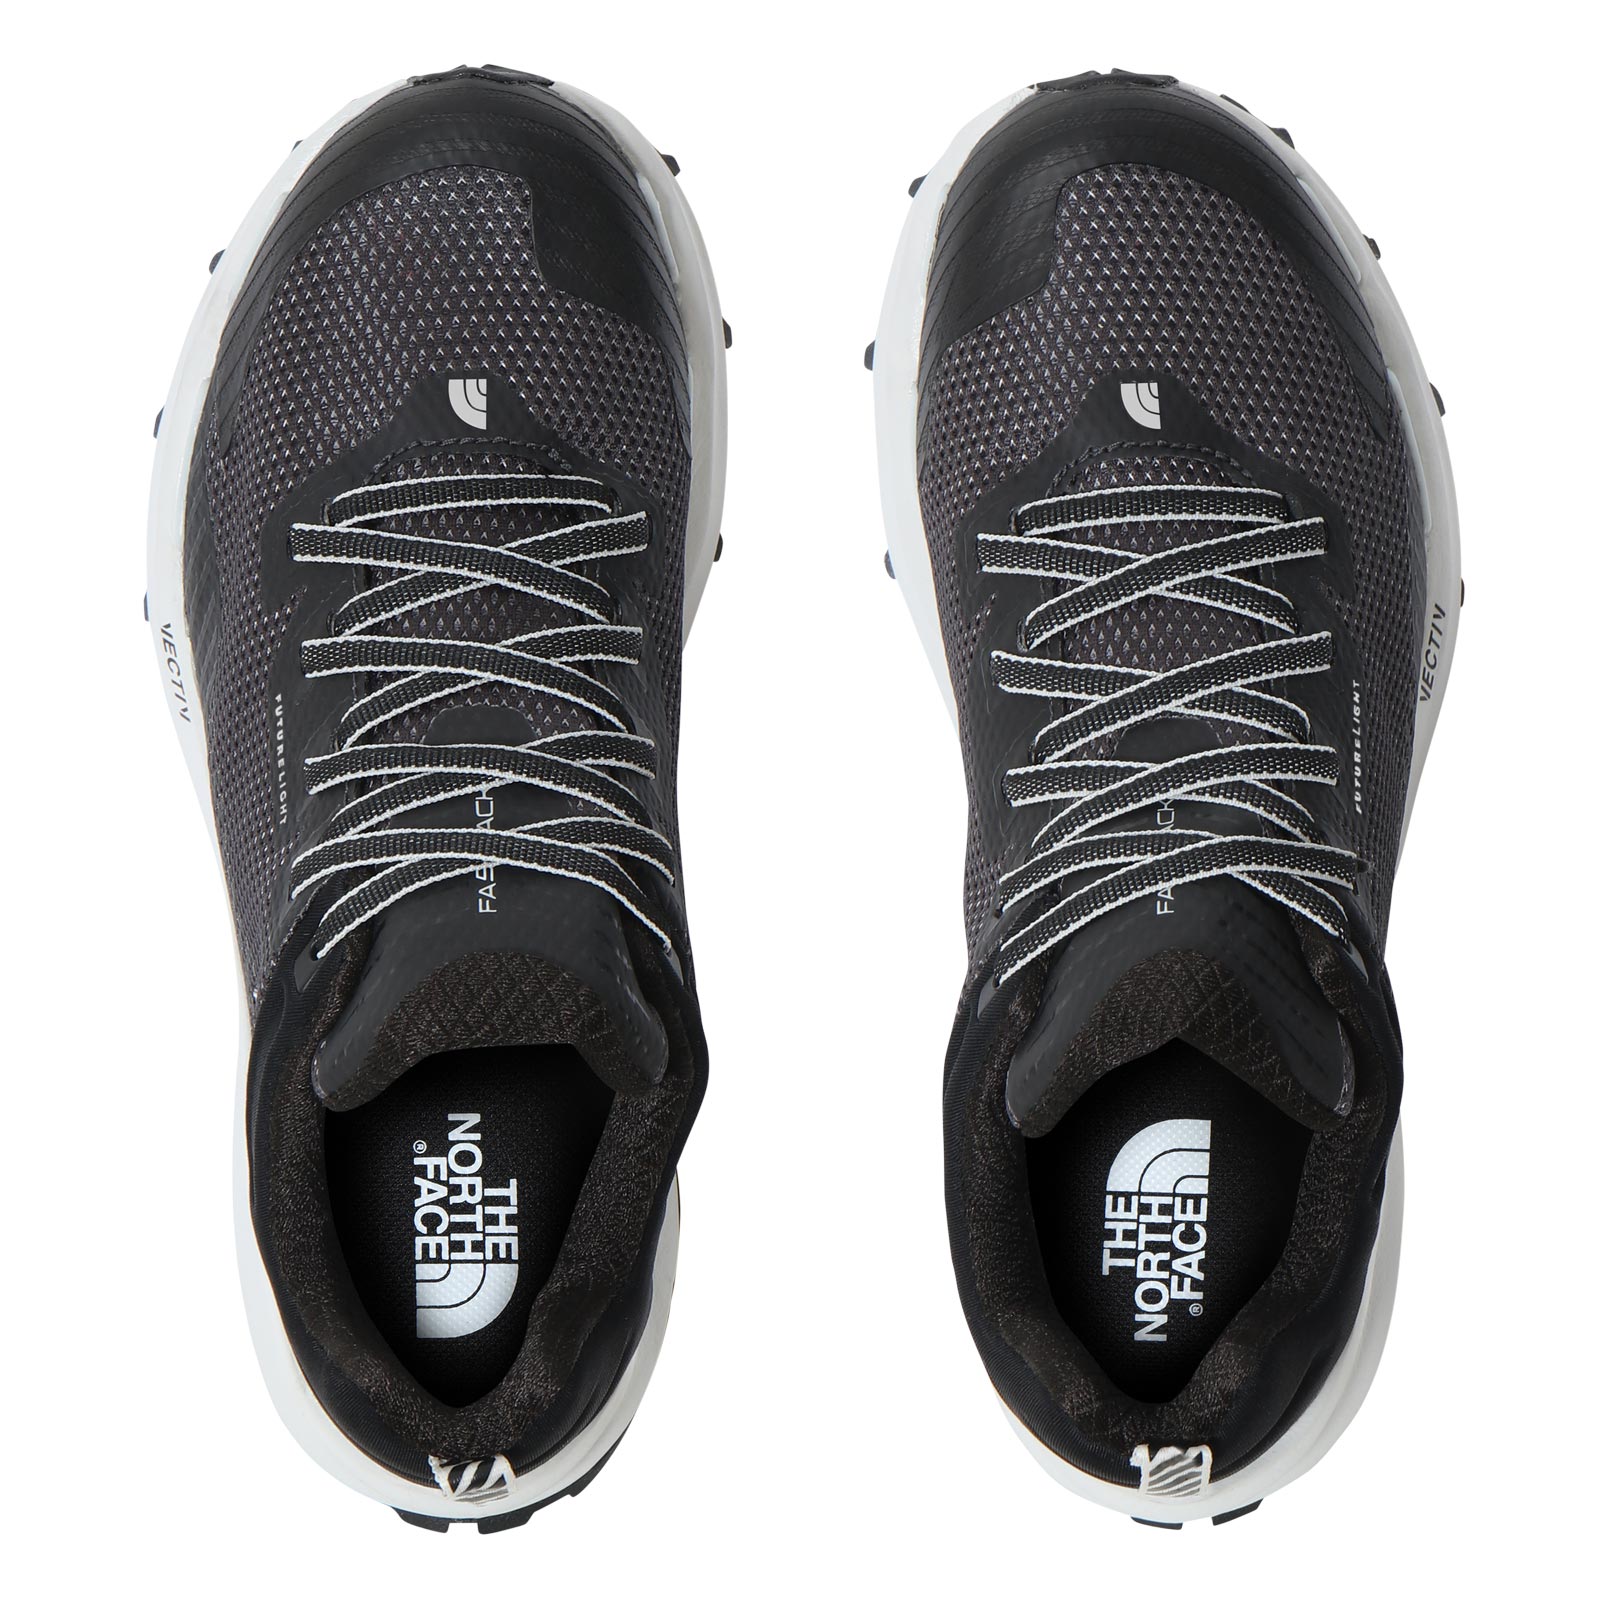 THE NORTH FACE VECTIV™ FASTPACK FUTURELIGHT™ WOMENS HIKING SHOES